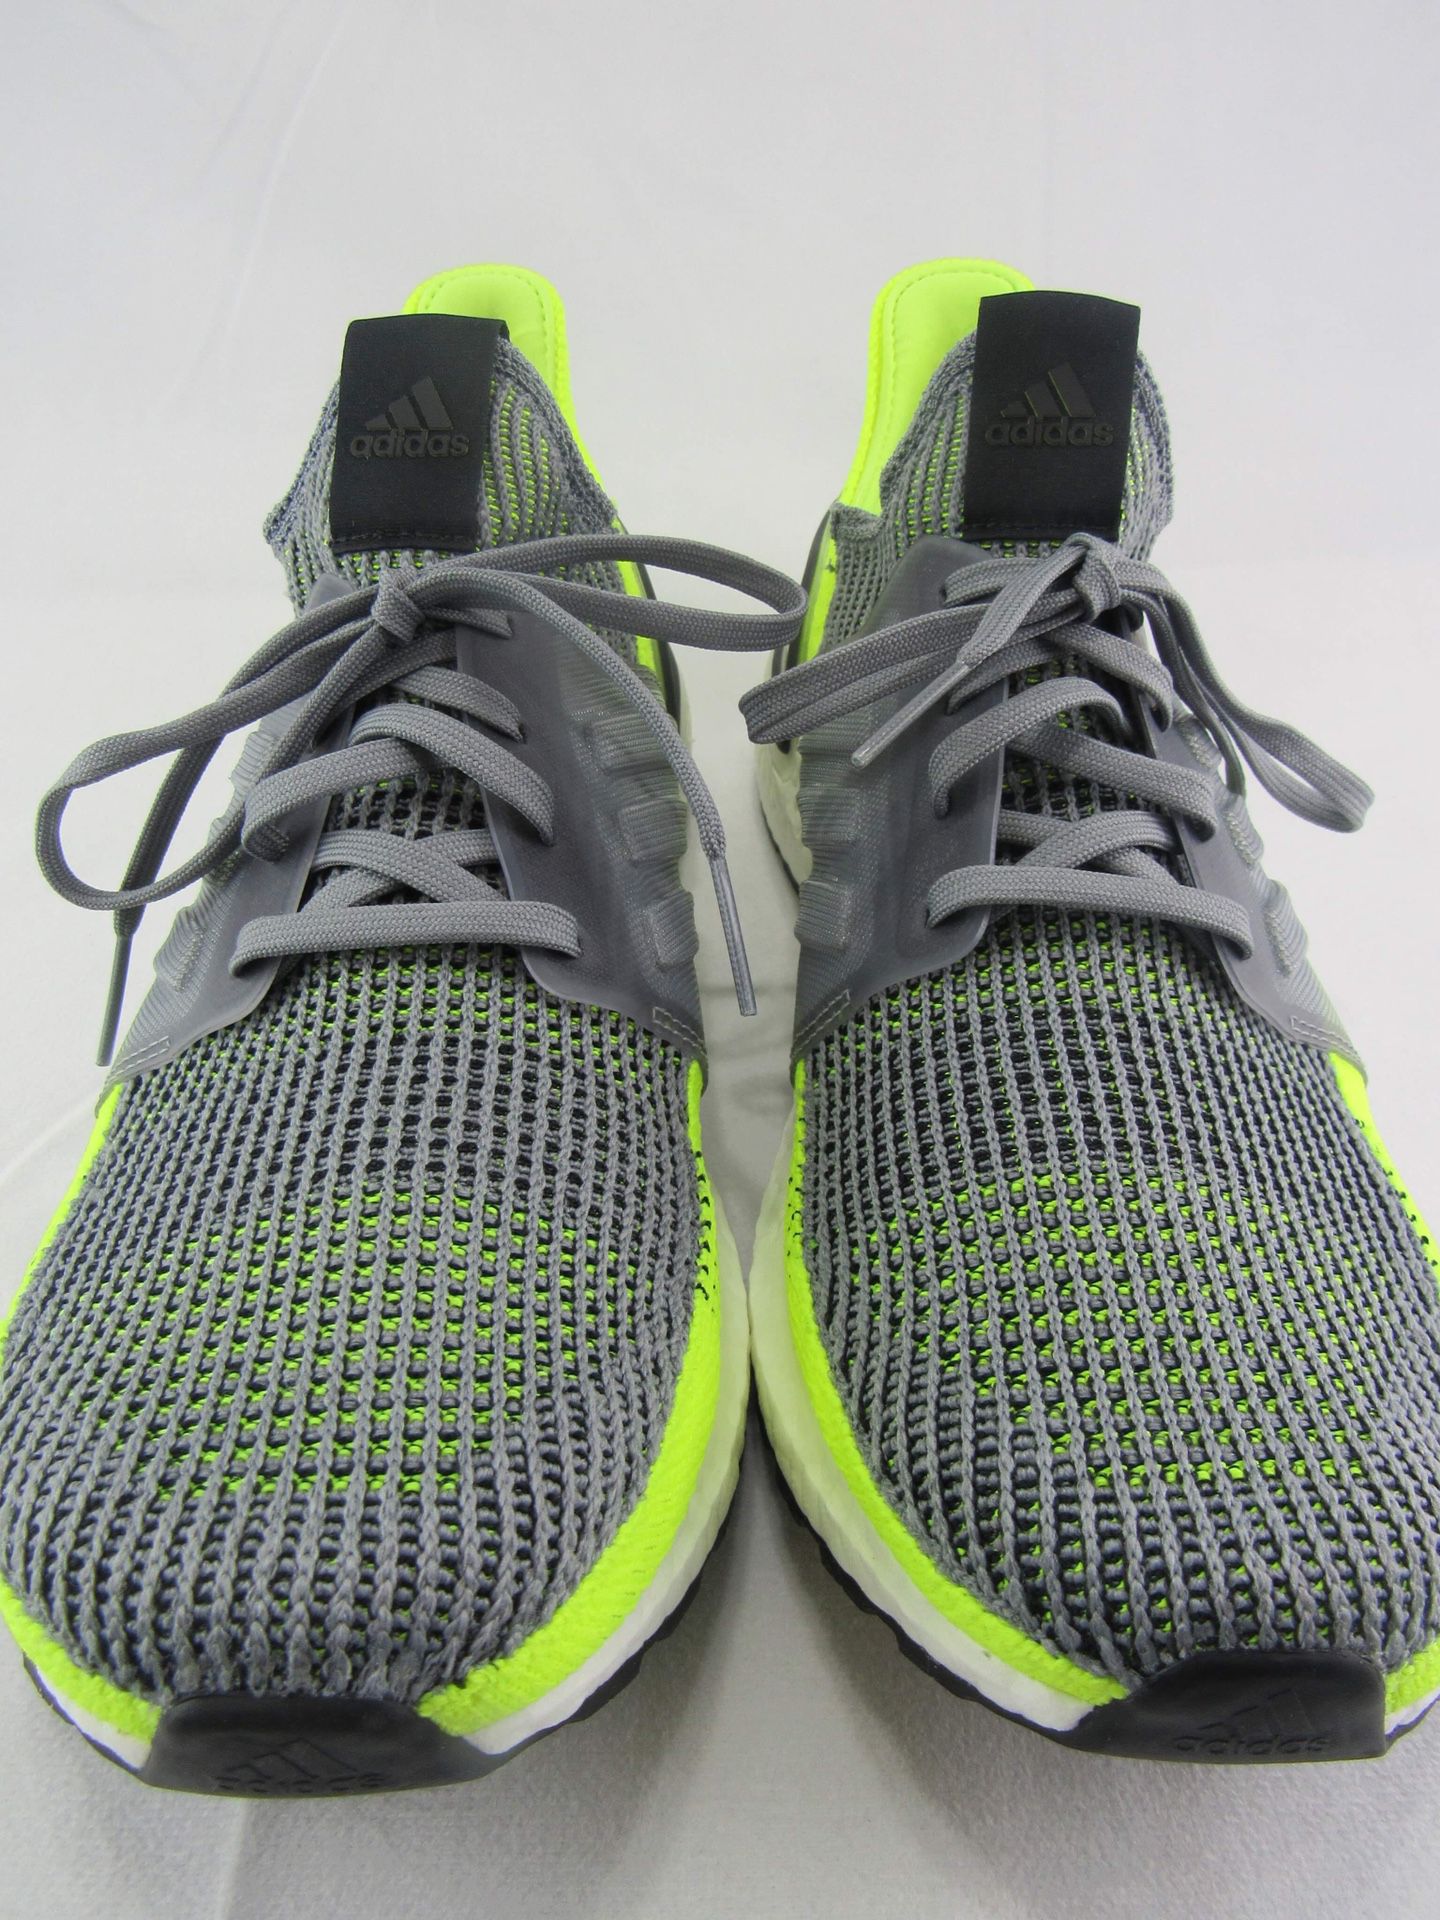 Adidas ultraboost 19 running shoes training shoes mens size 12